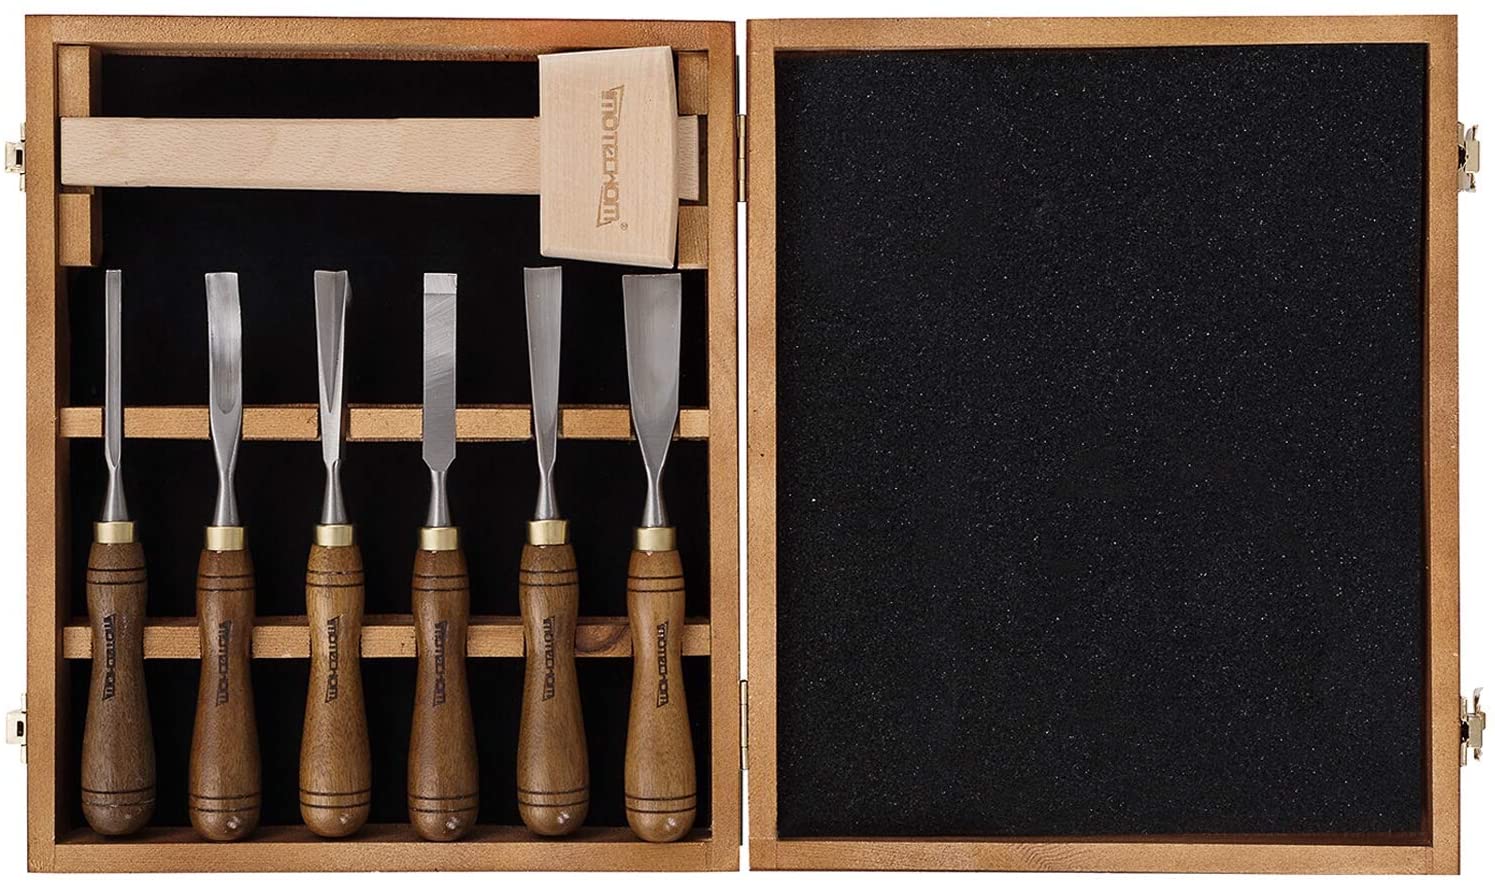 IMOTECHOM Woodworking Wood Carving Tools Chisel Set